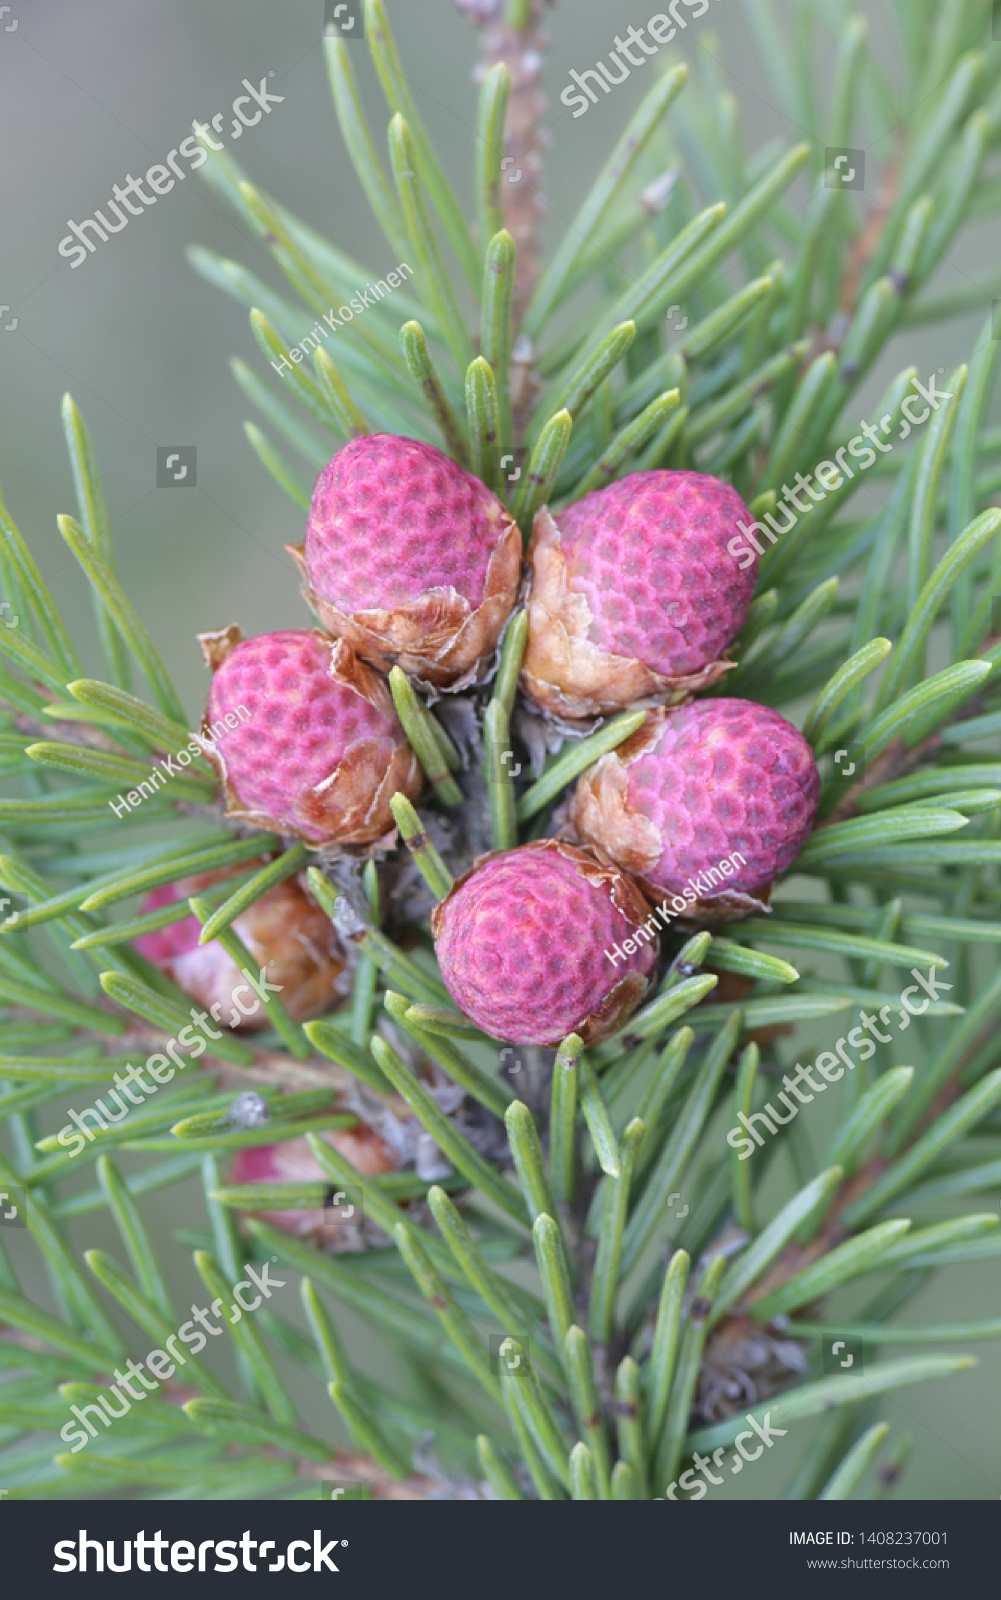 Fresh cones of Picea abies, the Norway spruce or European spruce #1408237001